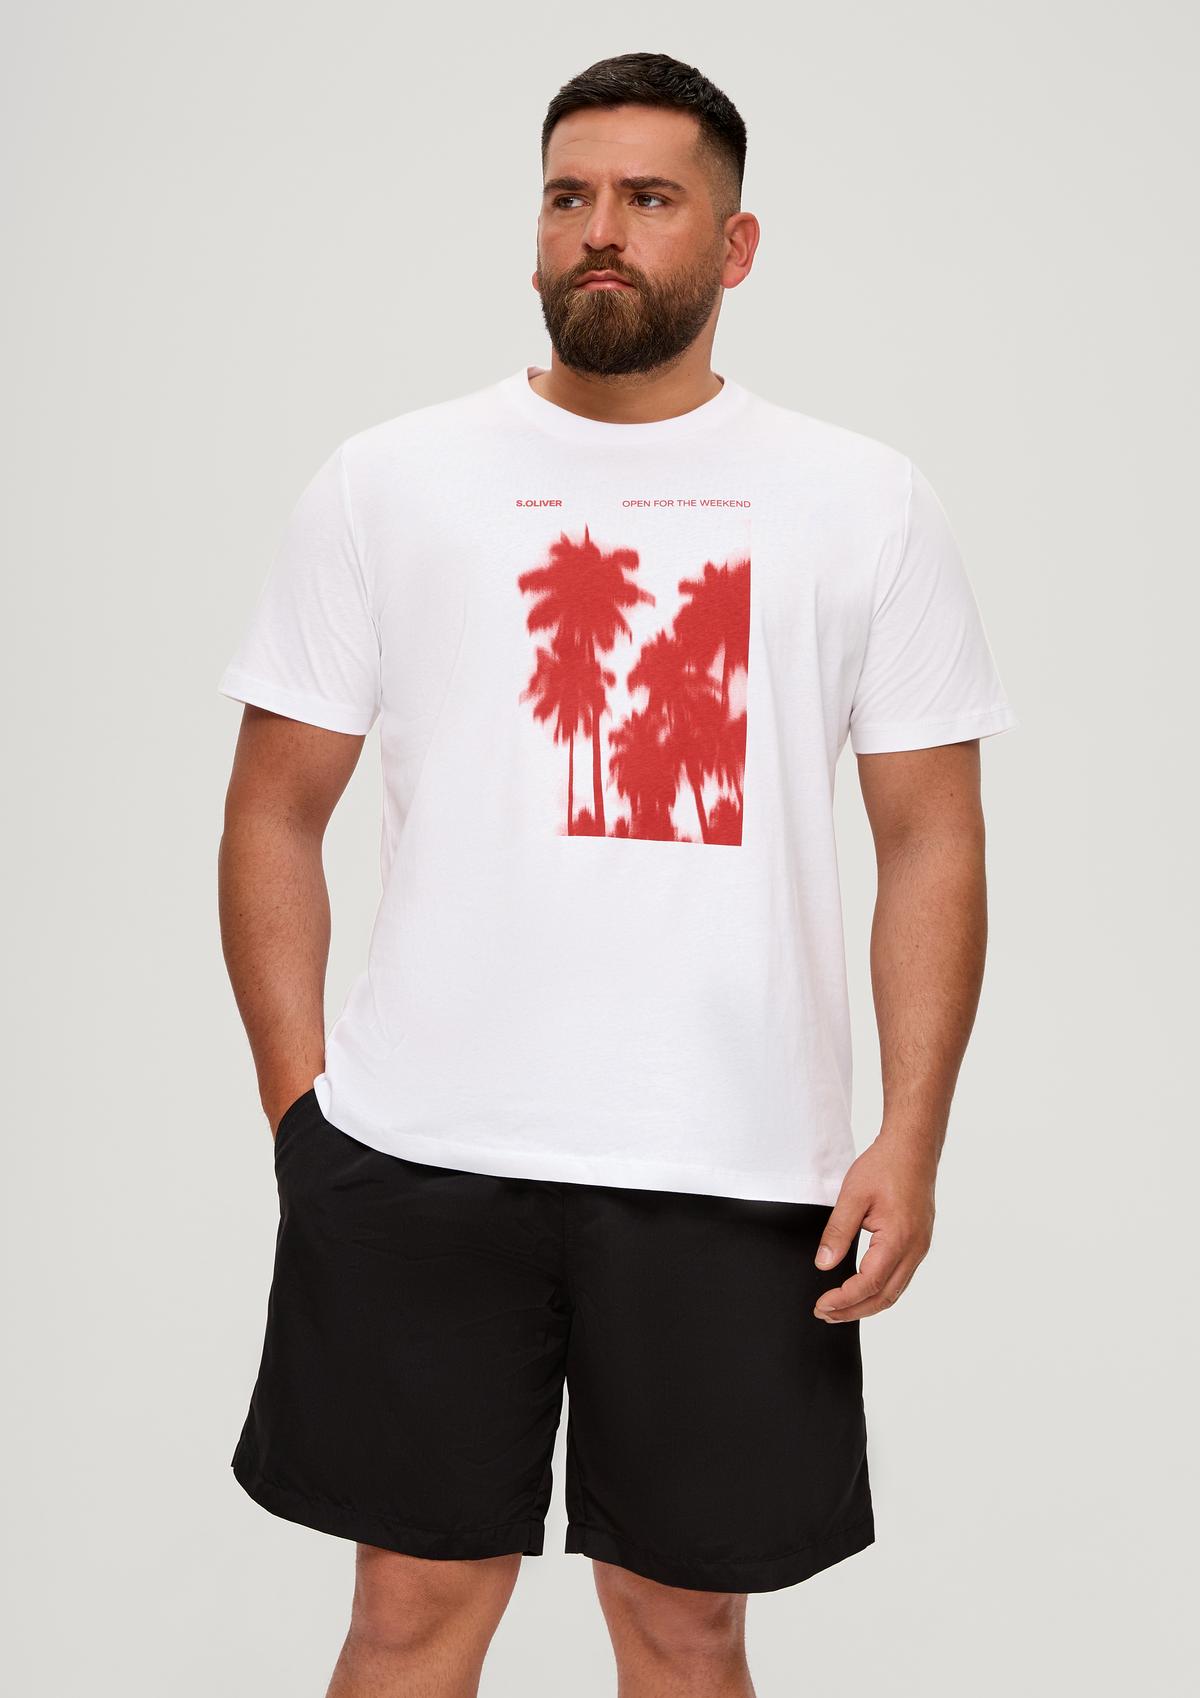 T-shirt in pure - cotton white